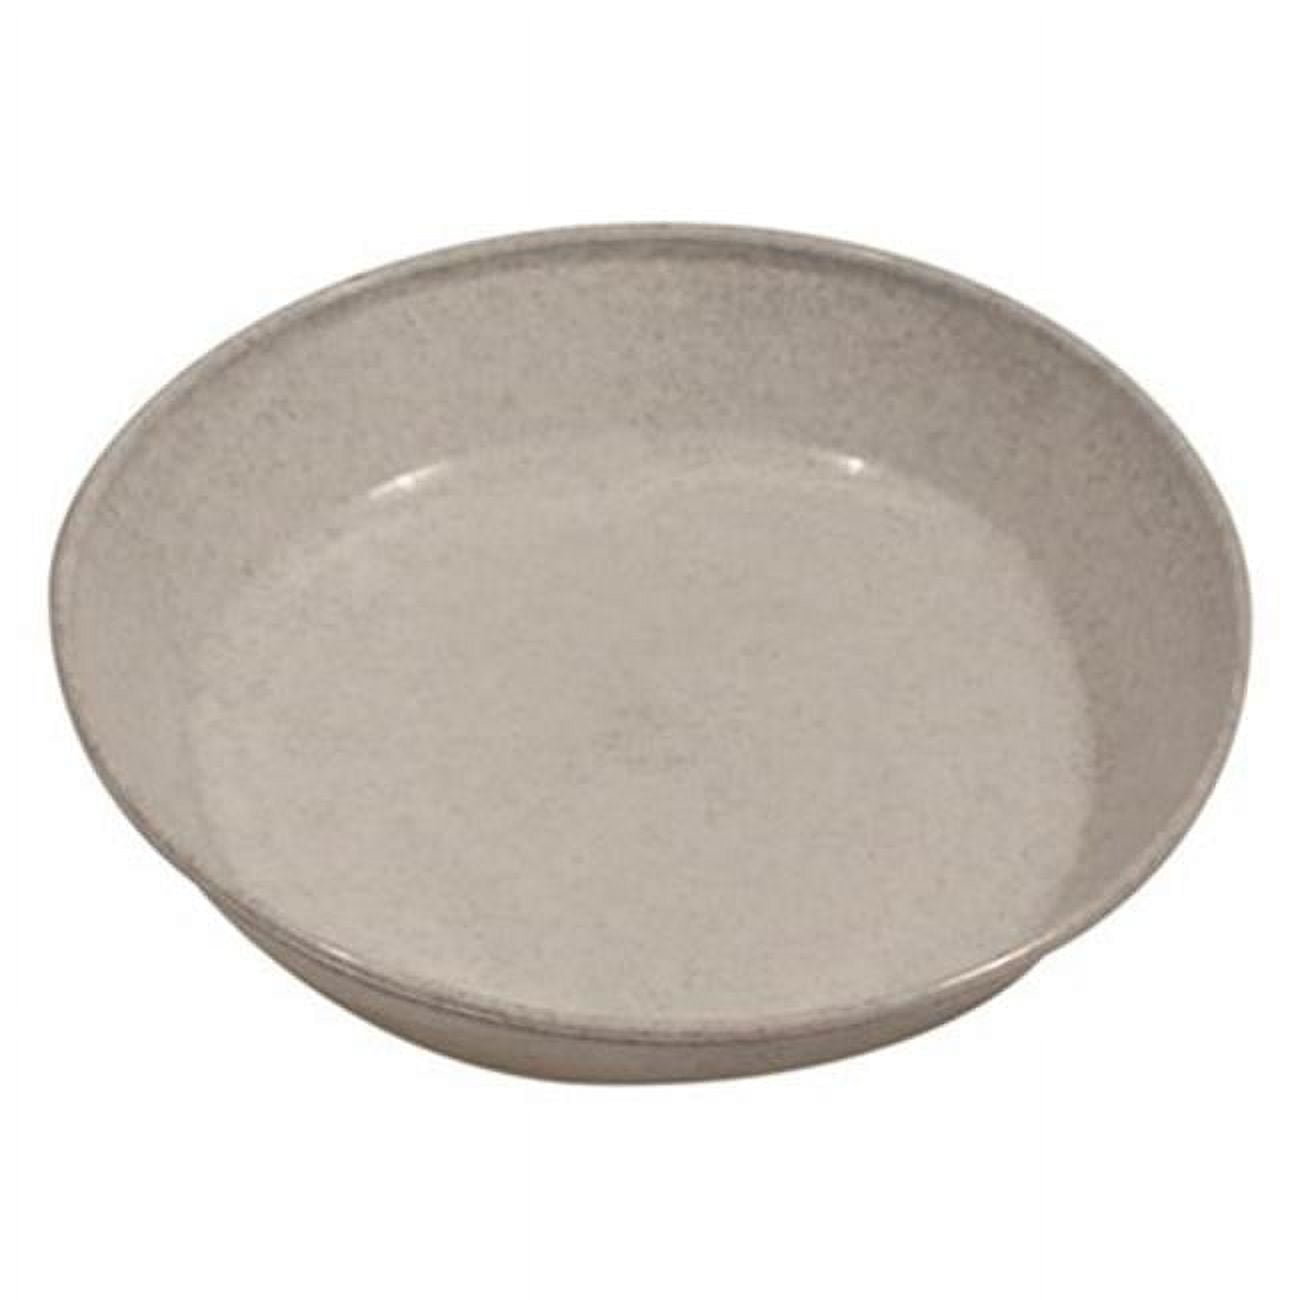 Picture of Austin Planter 4AS-G5pack 4 in. Granite Saucer - Pack of 5